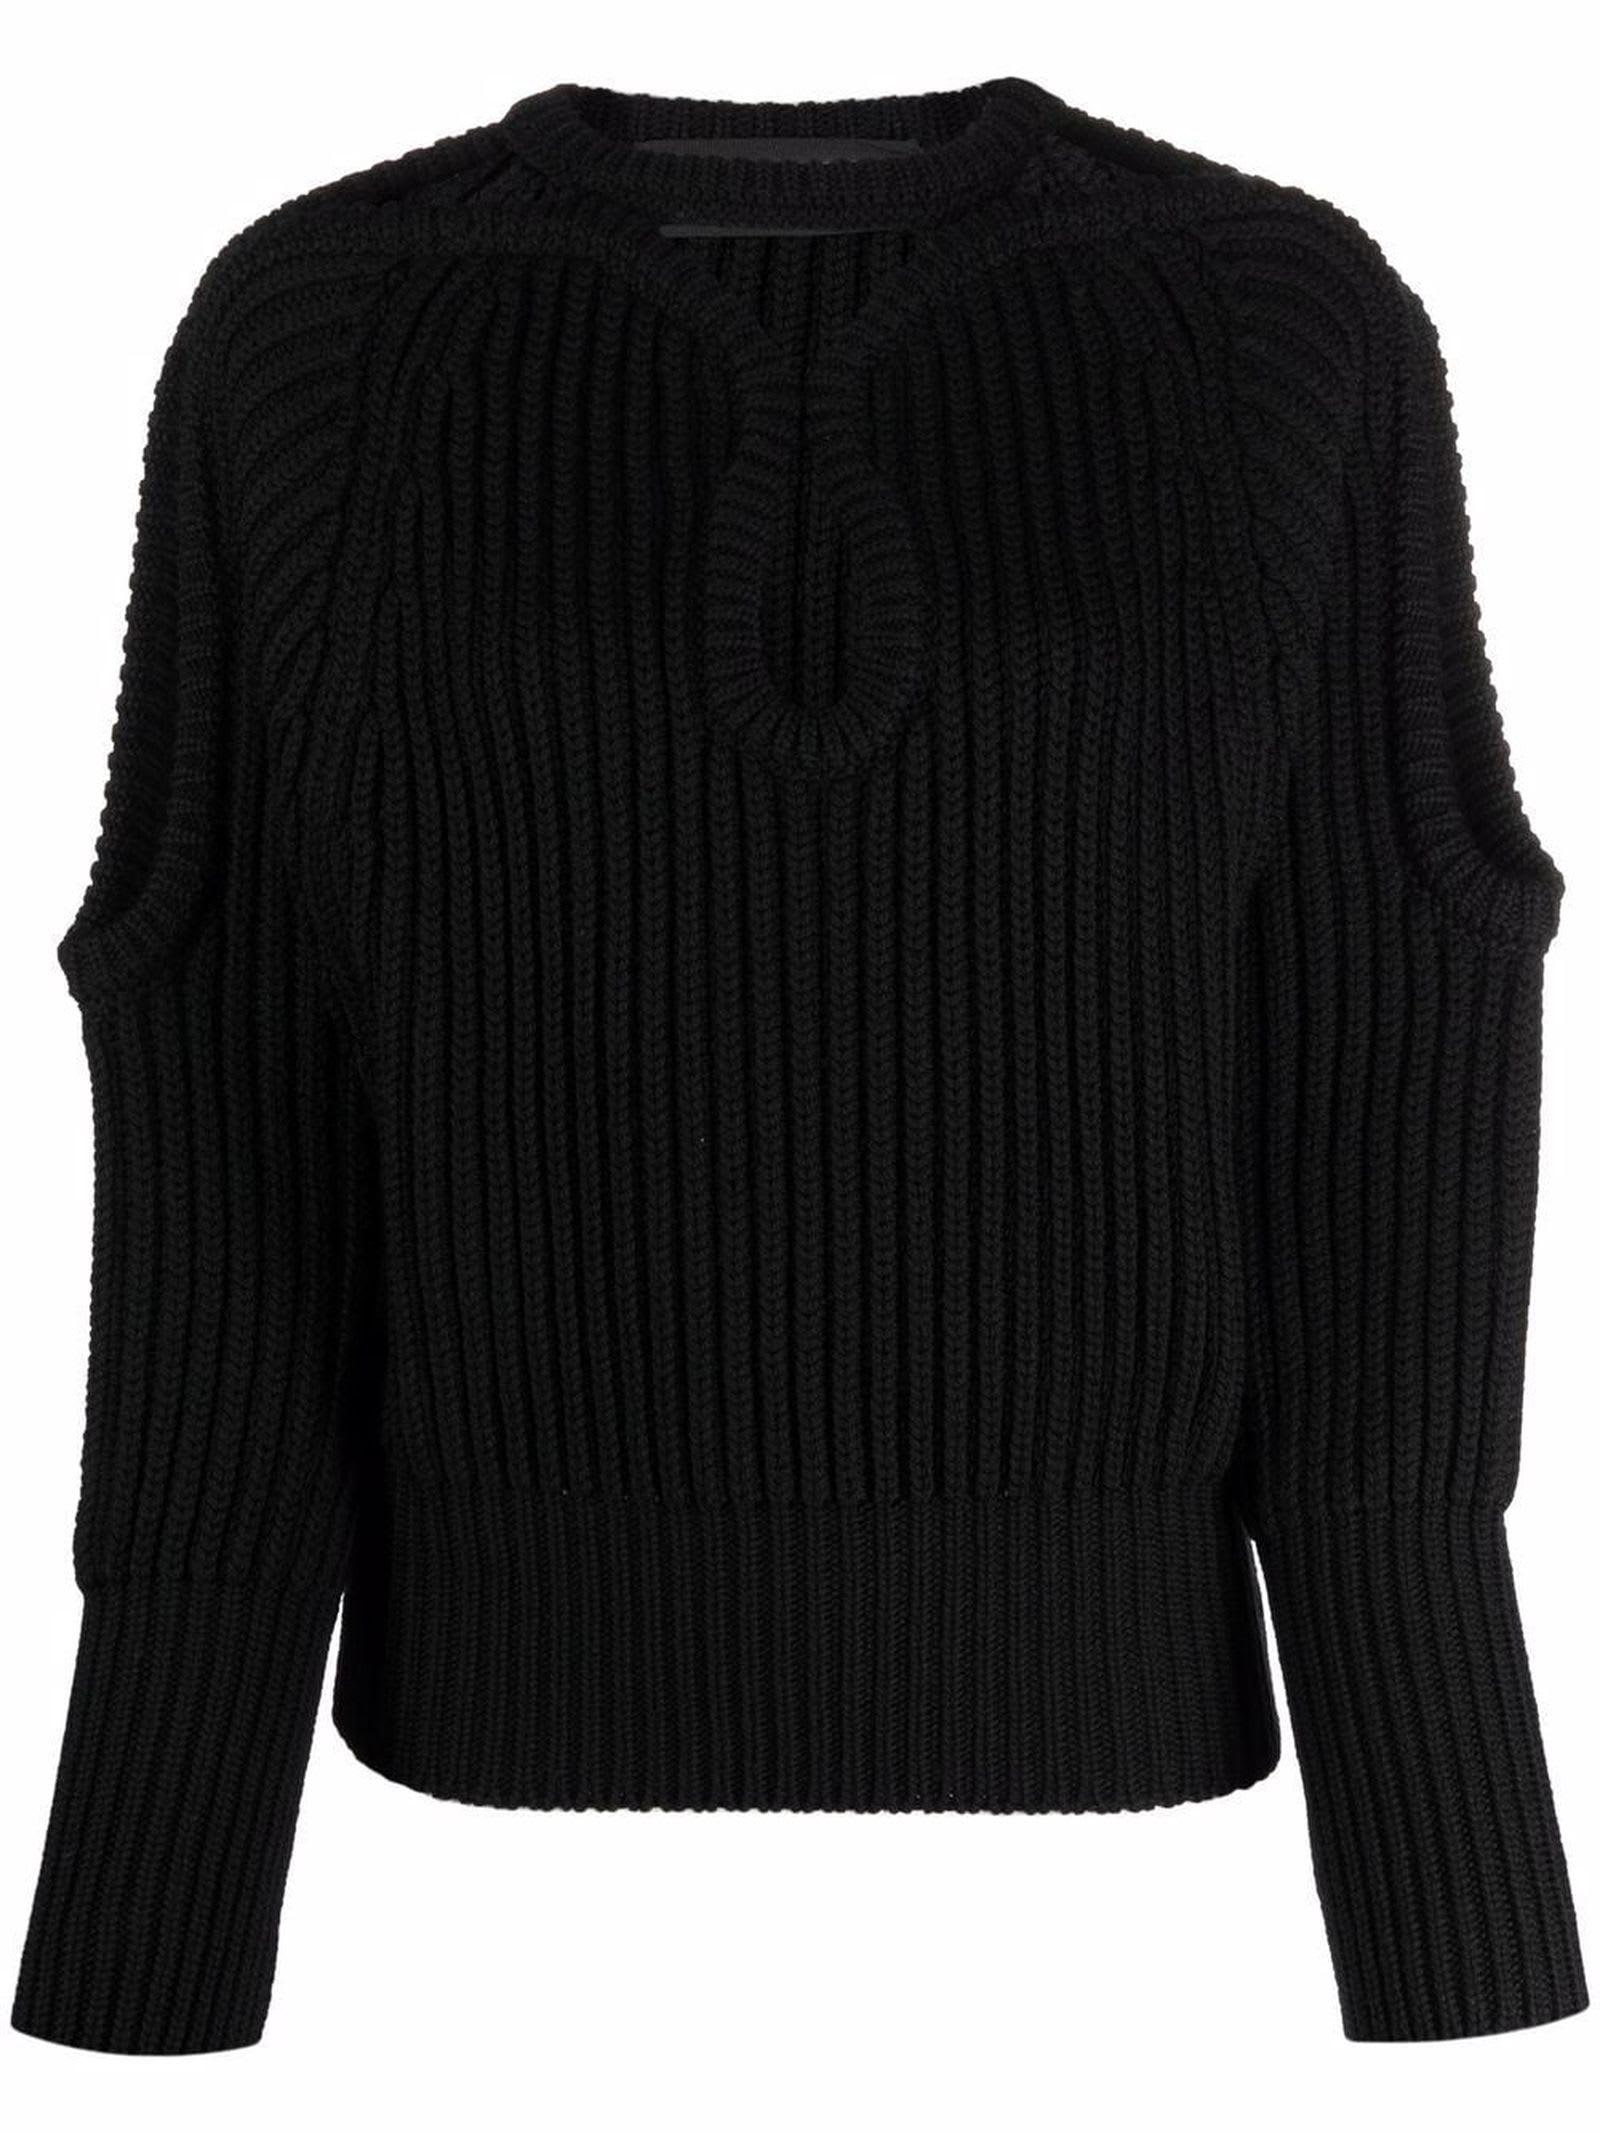 Les Hommes Black Virgin Wool Cut-out Knitted Jumper